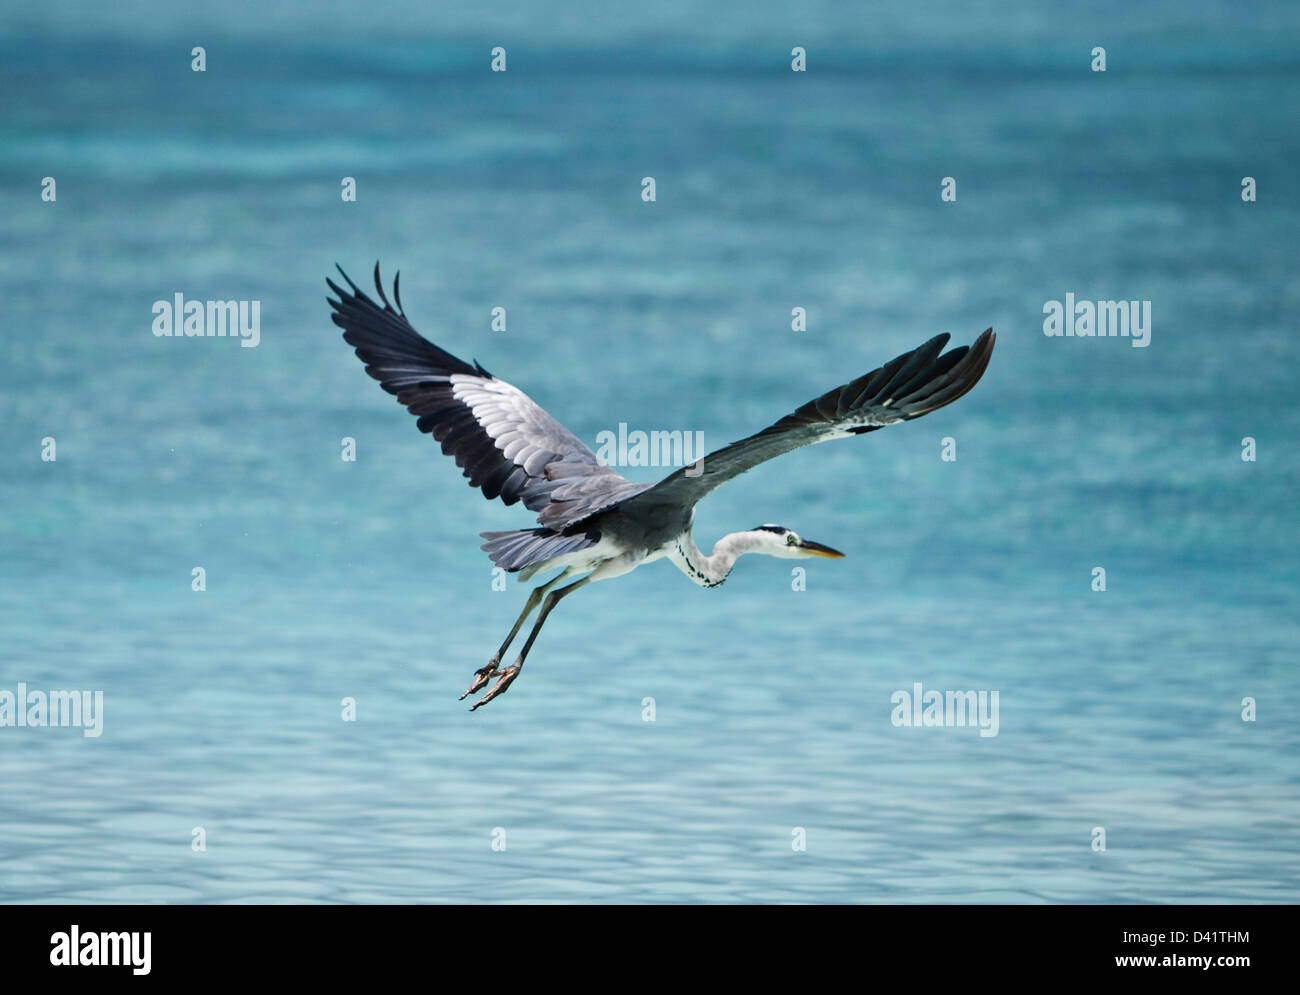 White faced heron flying above ocean, Maldives Stock Photo